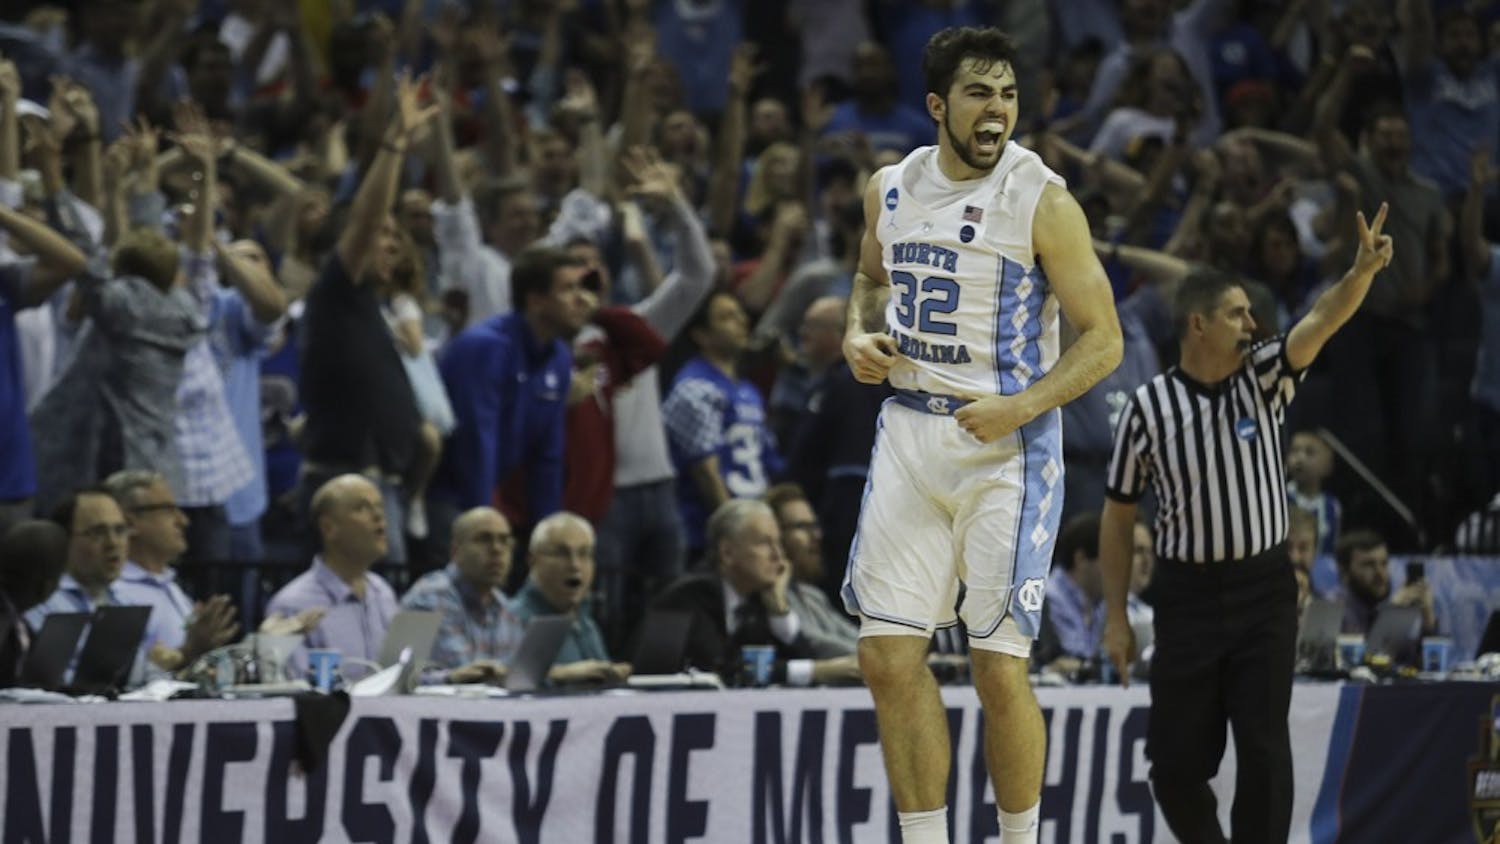 North Carolina forward Luke Maye (32) celebrates seconds after he hit the game winning shot in the NCAA Elite Eight game against Kentucky in Memphis on Sunday.